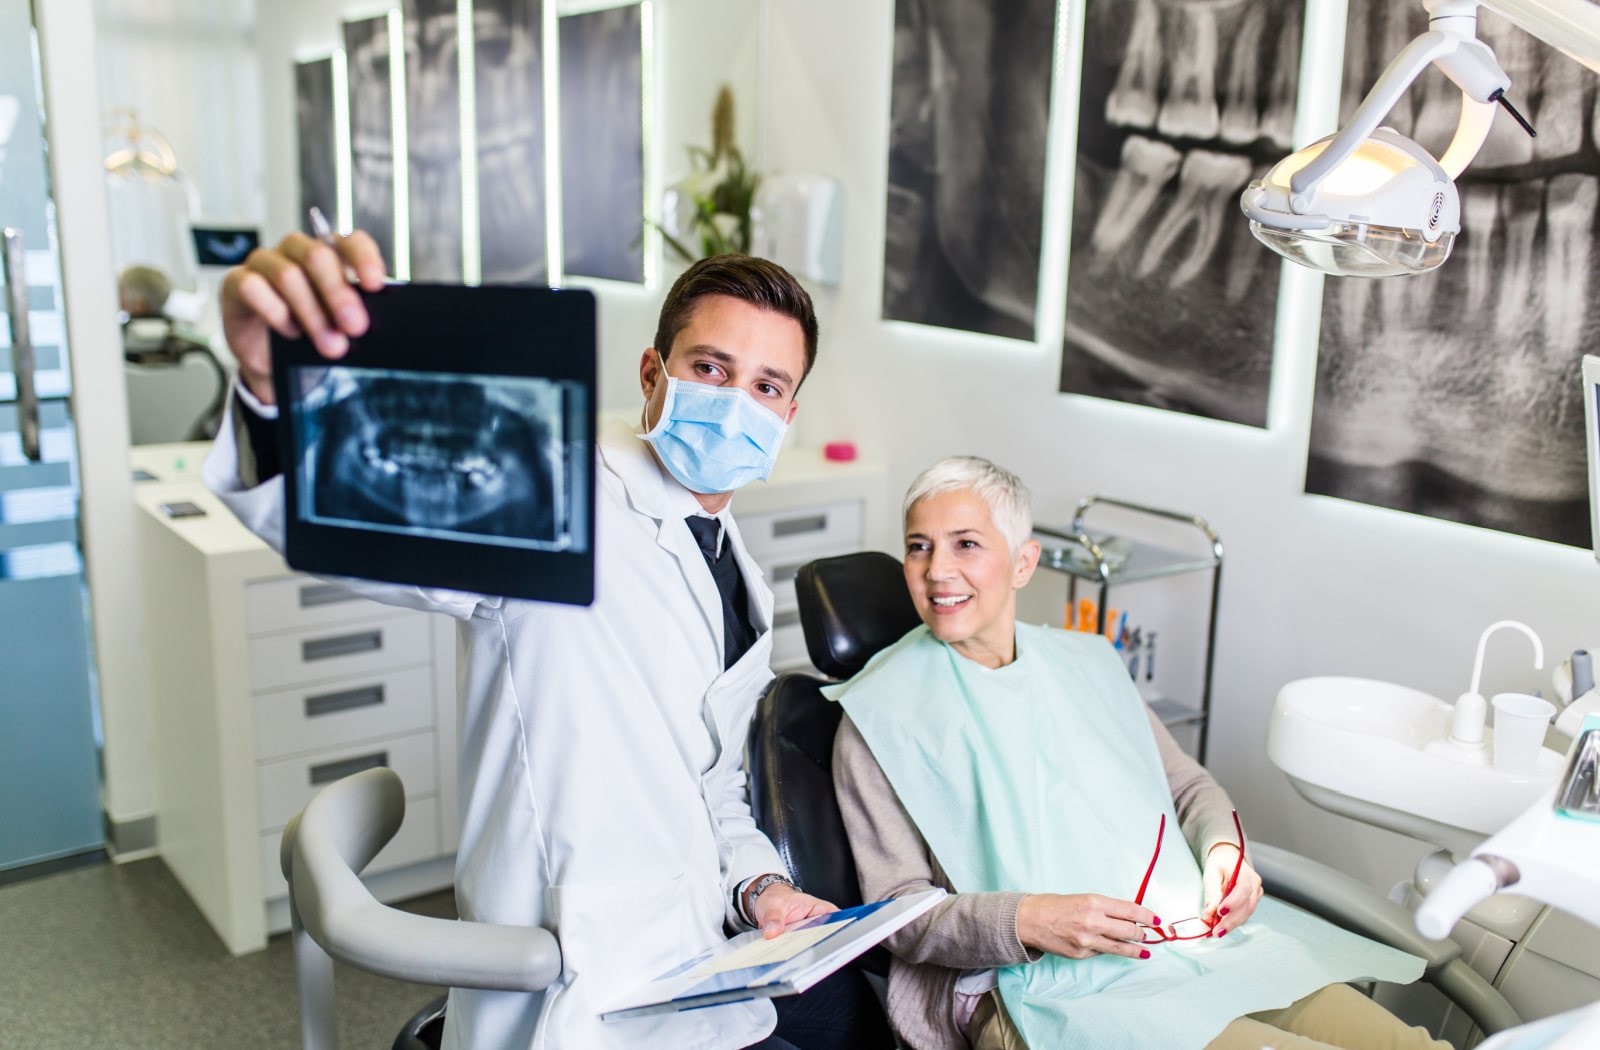 A dentist holding up an X-ray and showing it to a female patient as she sits in the dental chair